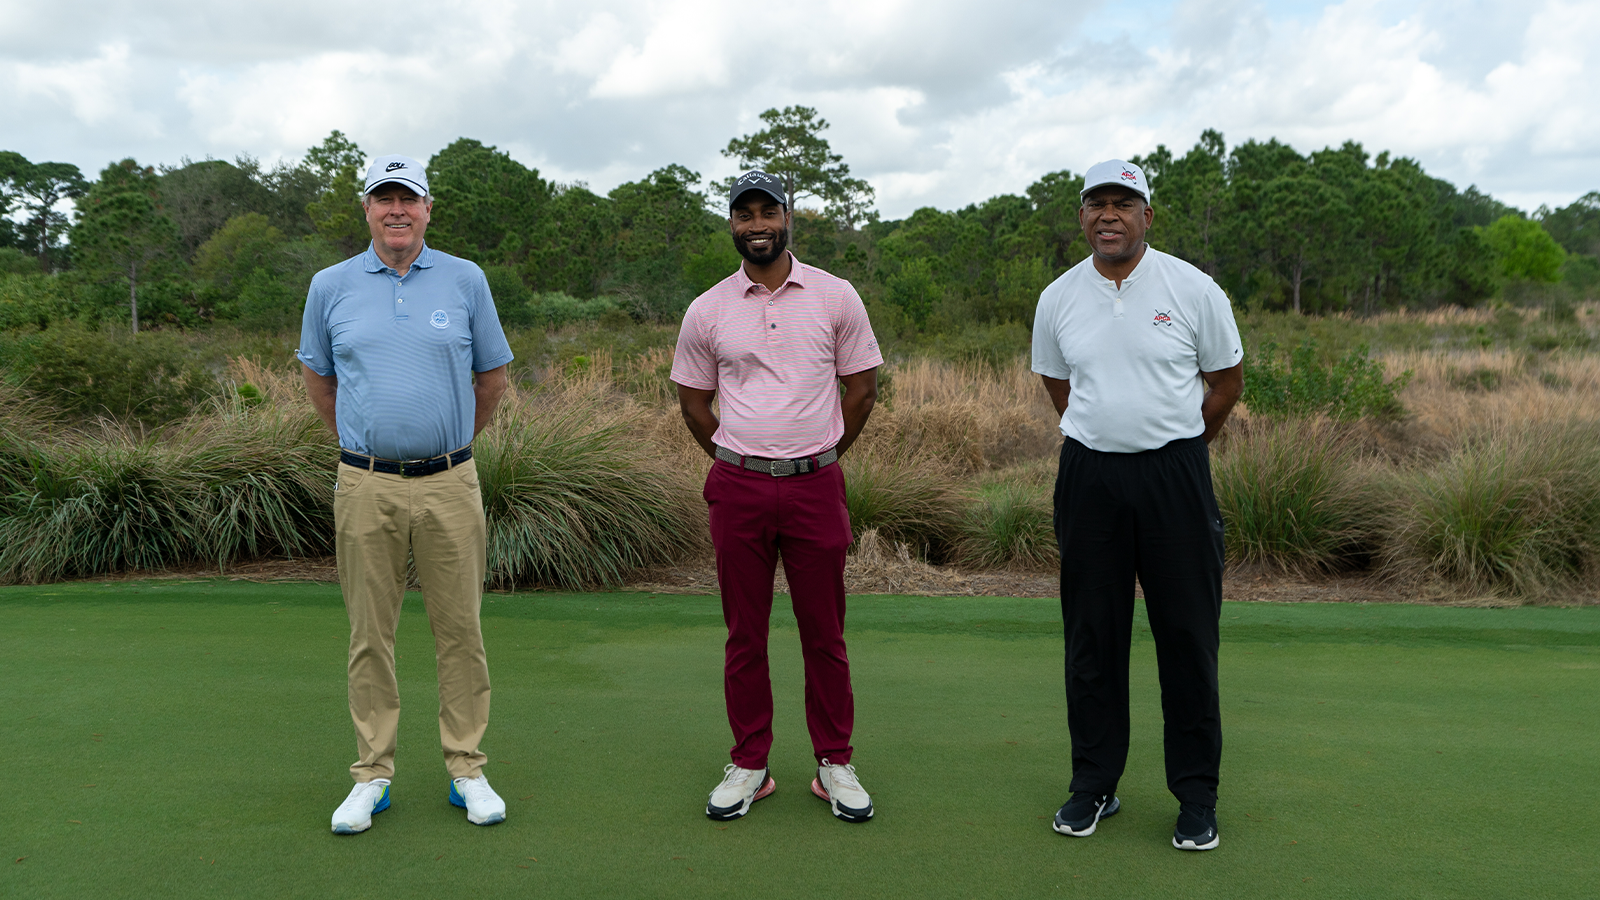 PGA of America President John Lindert, Clay Myers II, PGA, and Cole Smith smile on the first tee of the Dye Course at the APGA TOUR Black History Month Classic held at the PGA Golf Club on February 19, 2021 in Port St. Lucie, Florida. (Photo by Rachel Harris/PGA of America)